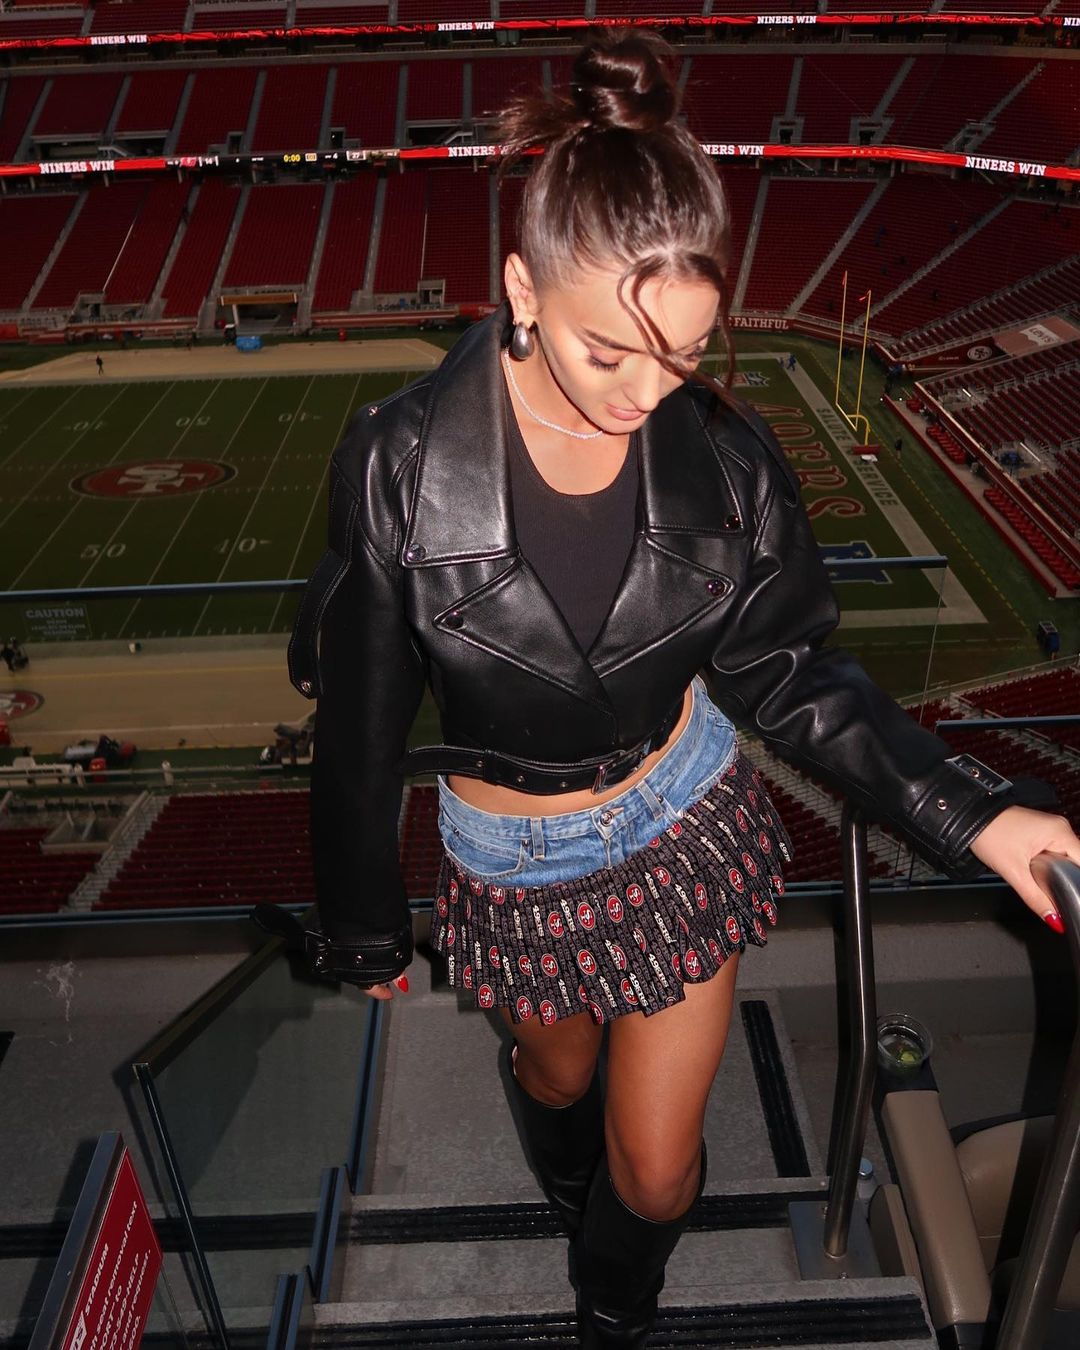 Kristin Juszczyk is the Wag Going Viral Thanks to Taylor Swift! - Photo 23